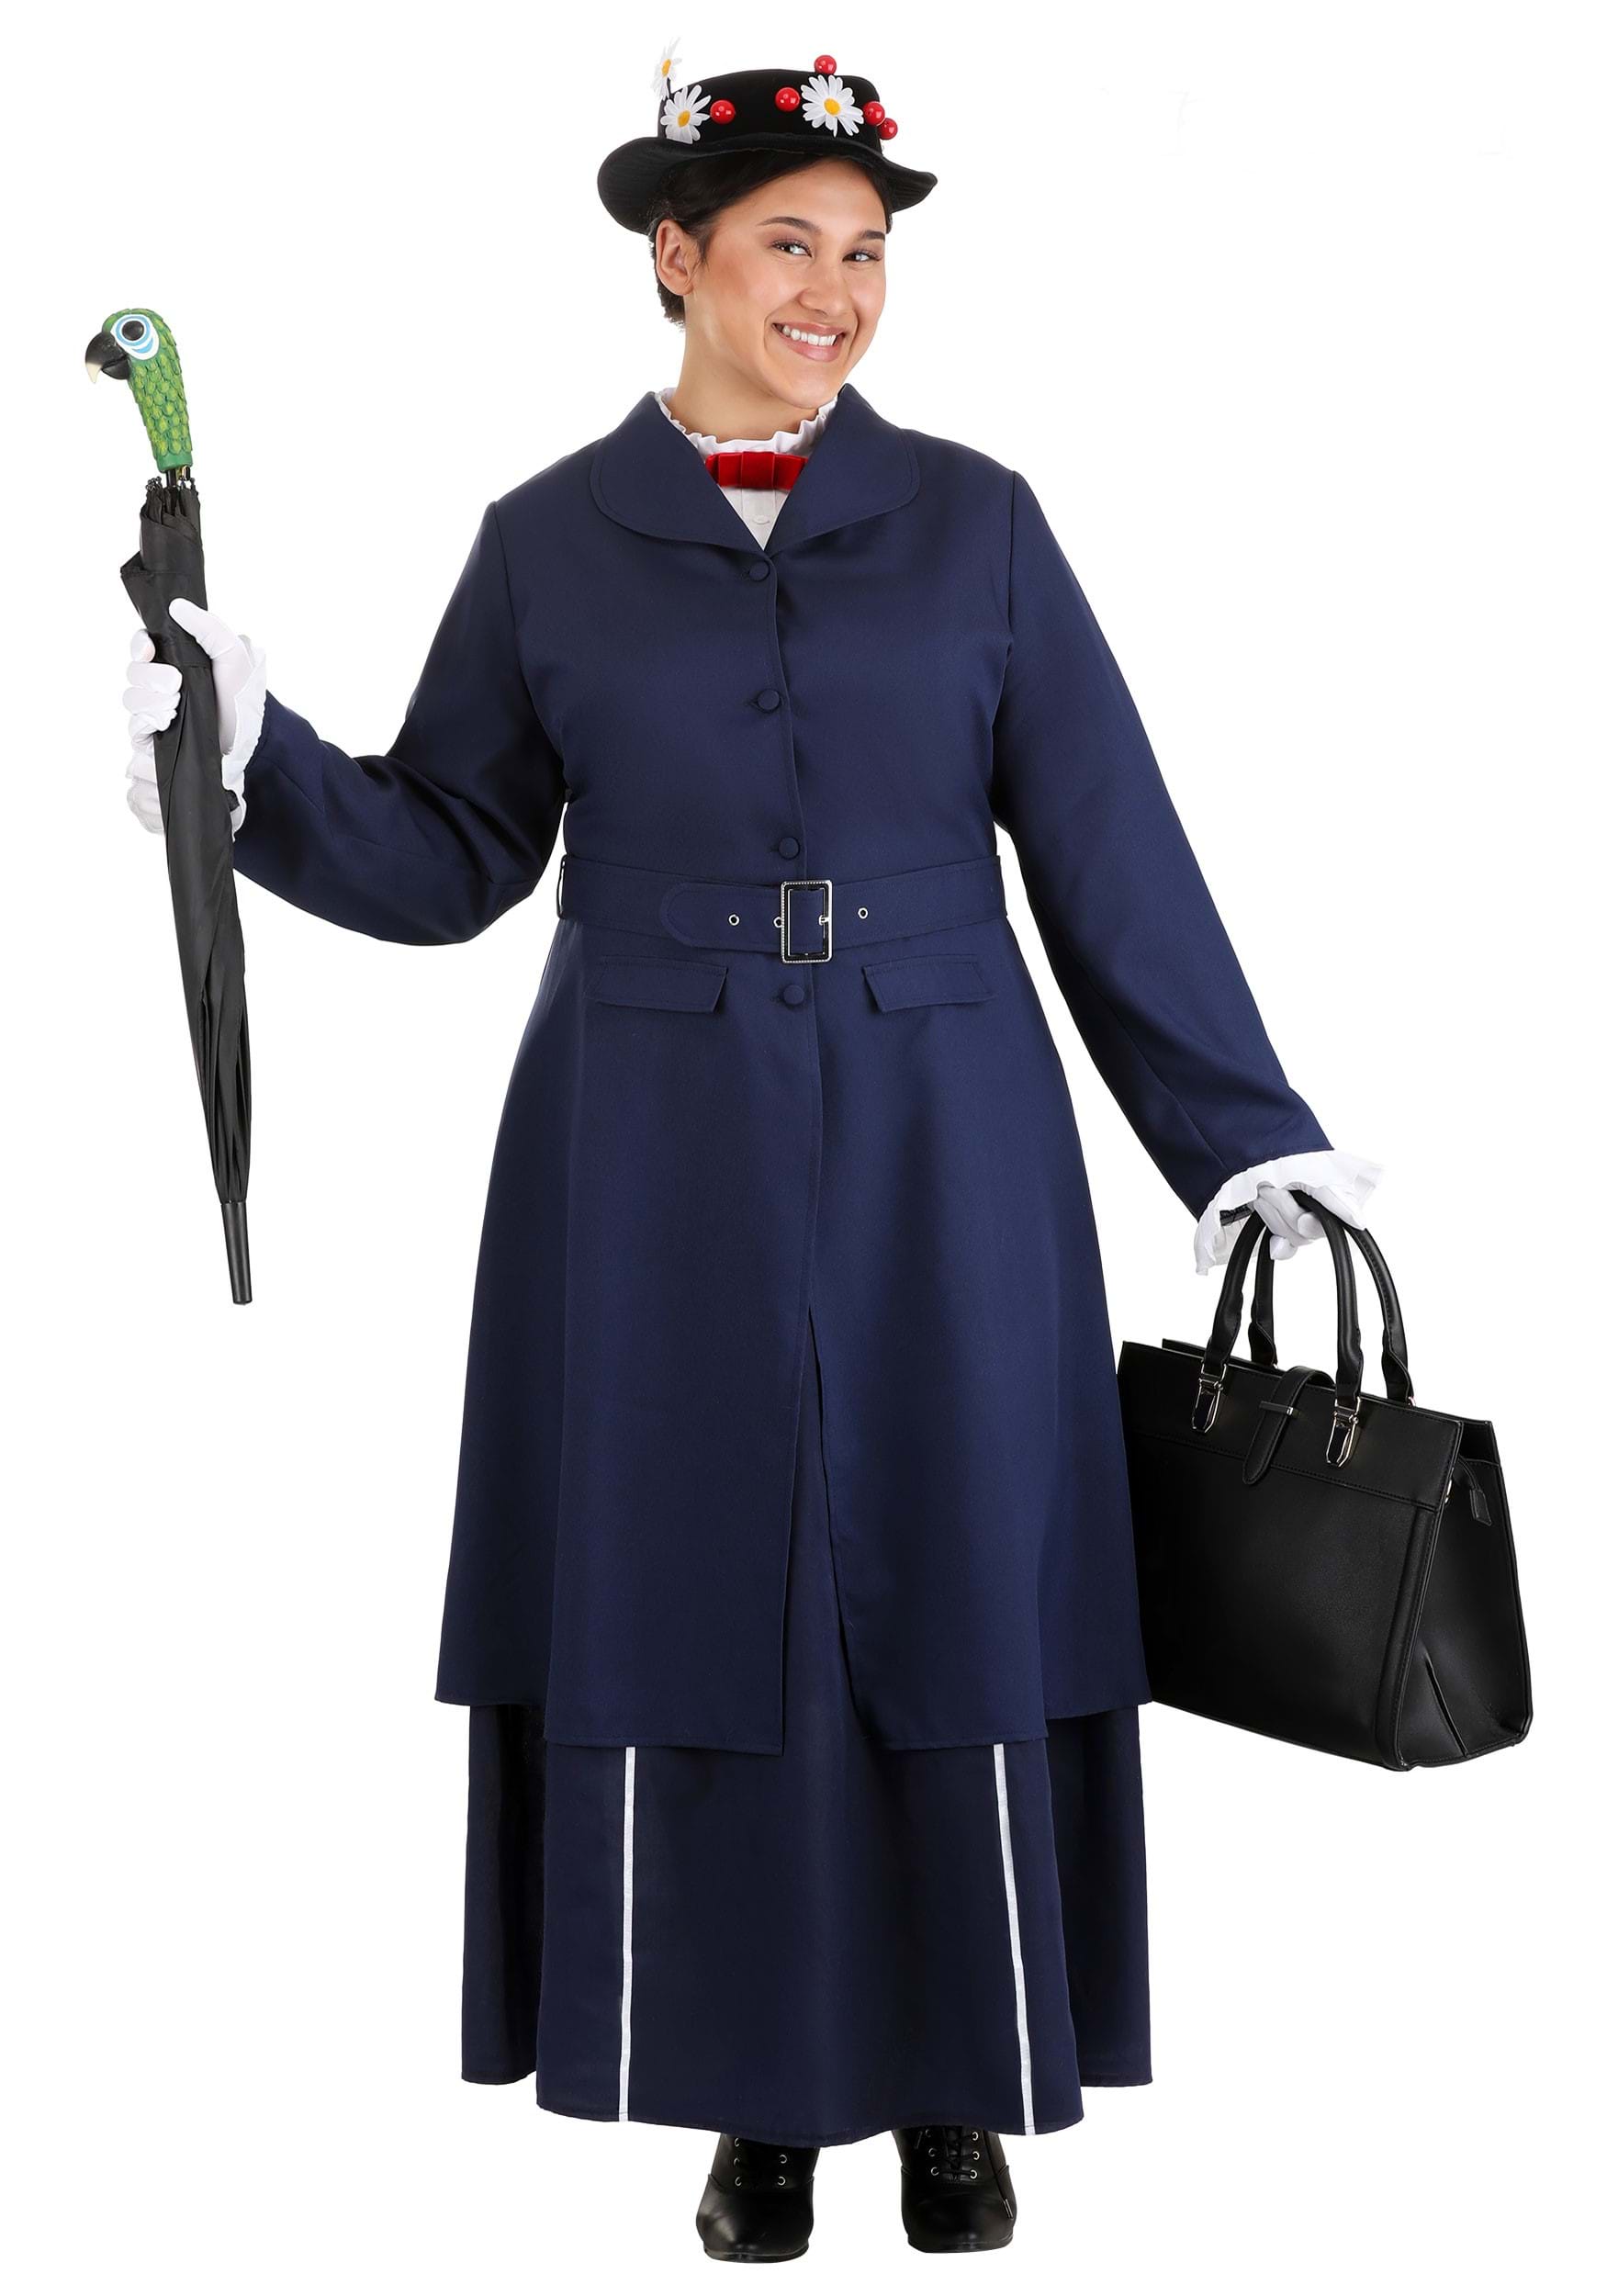 Mary Poppins - Child Costume - Aplusparty